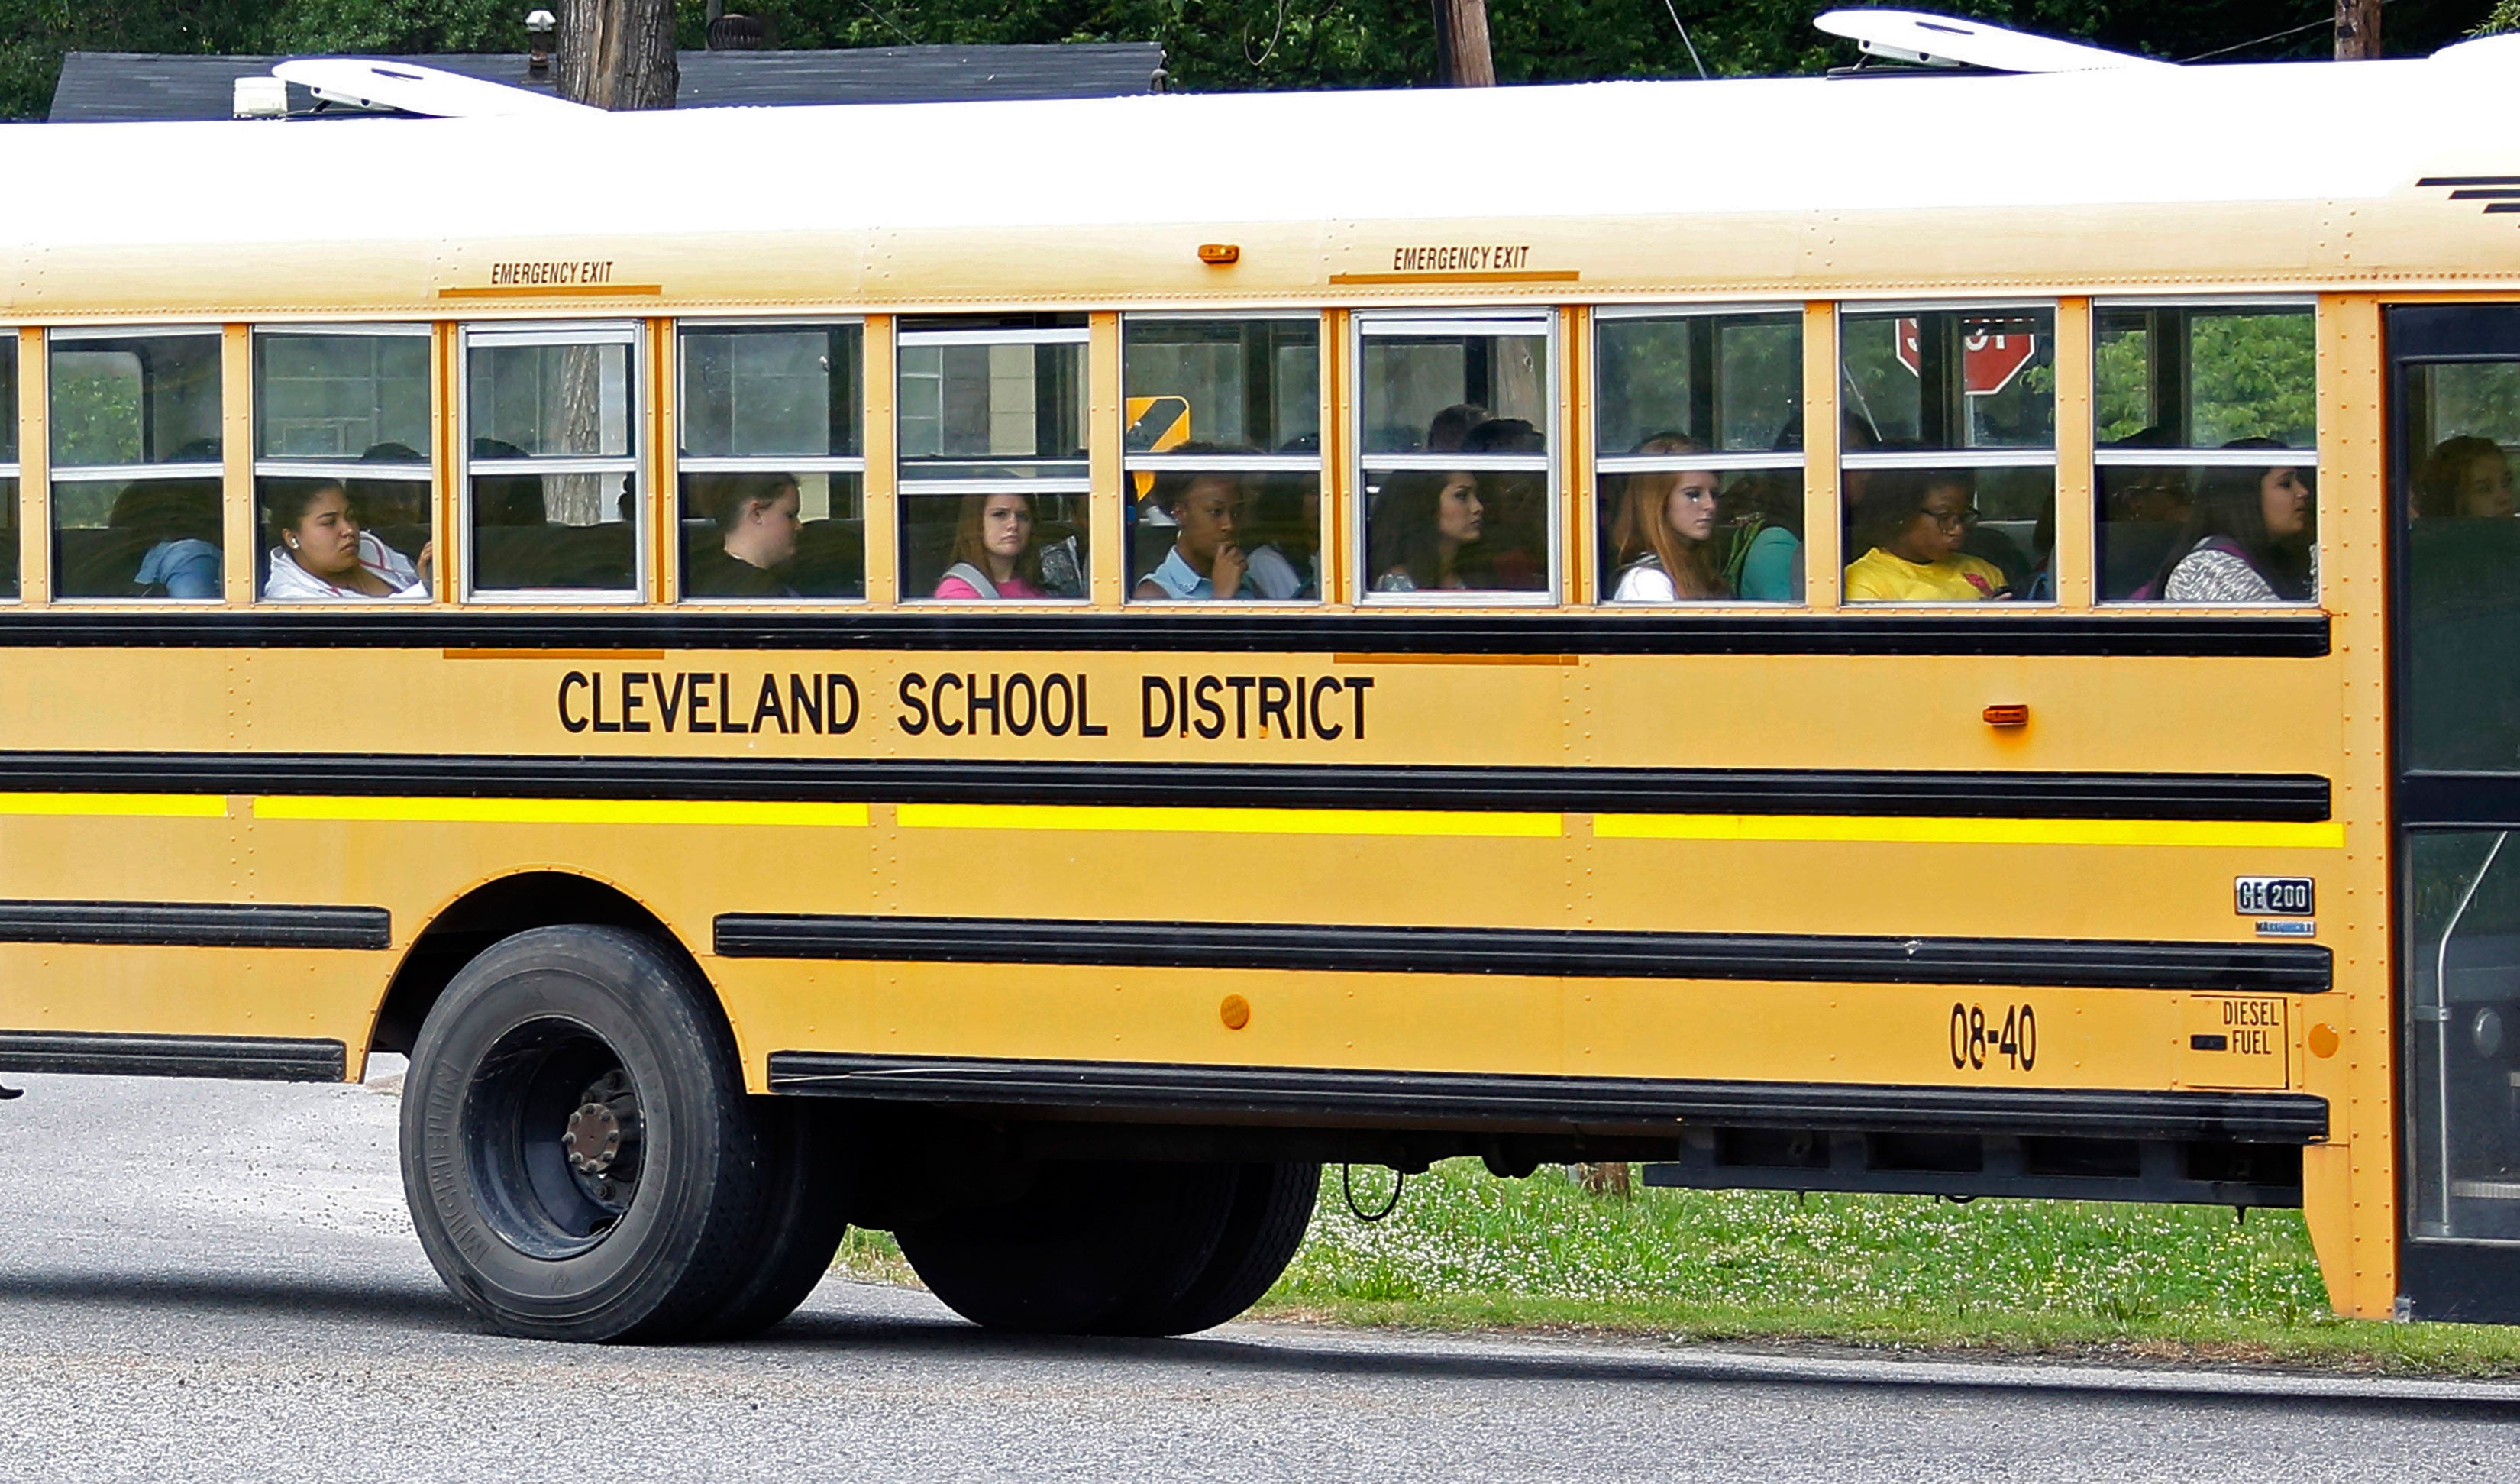 Mississippi Town Ordered to Desegregate Its Schools
